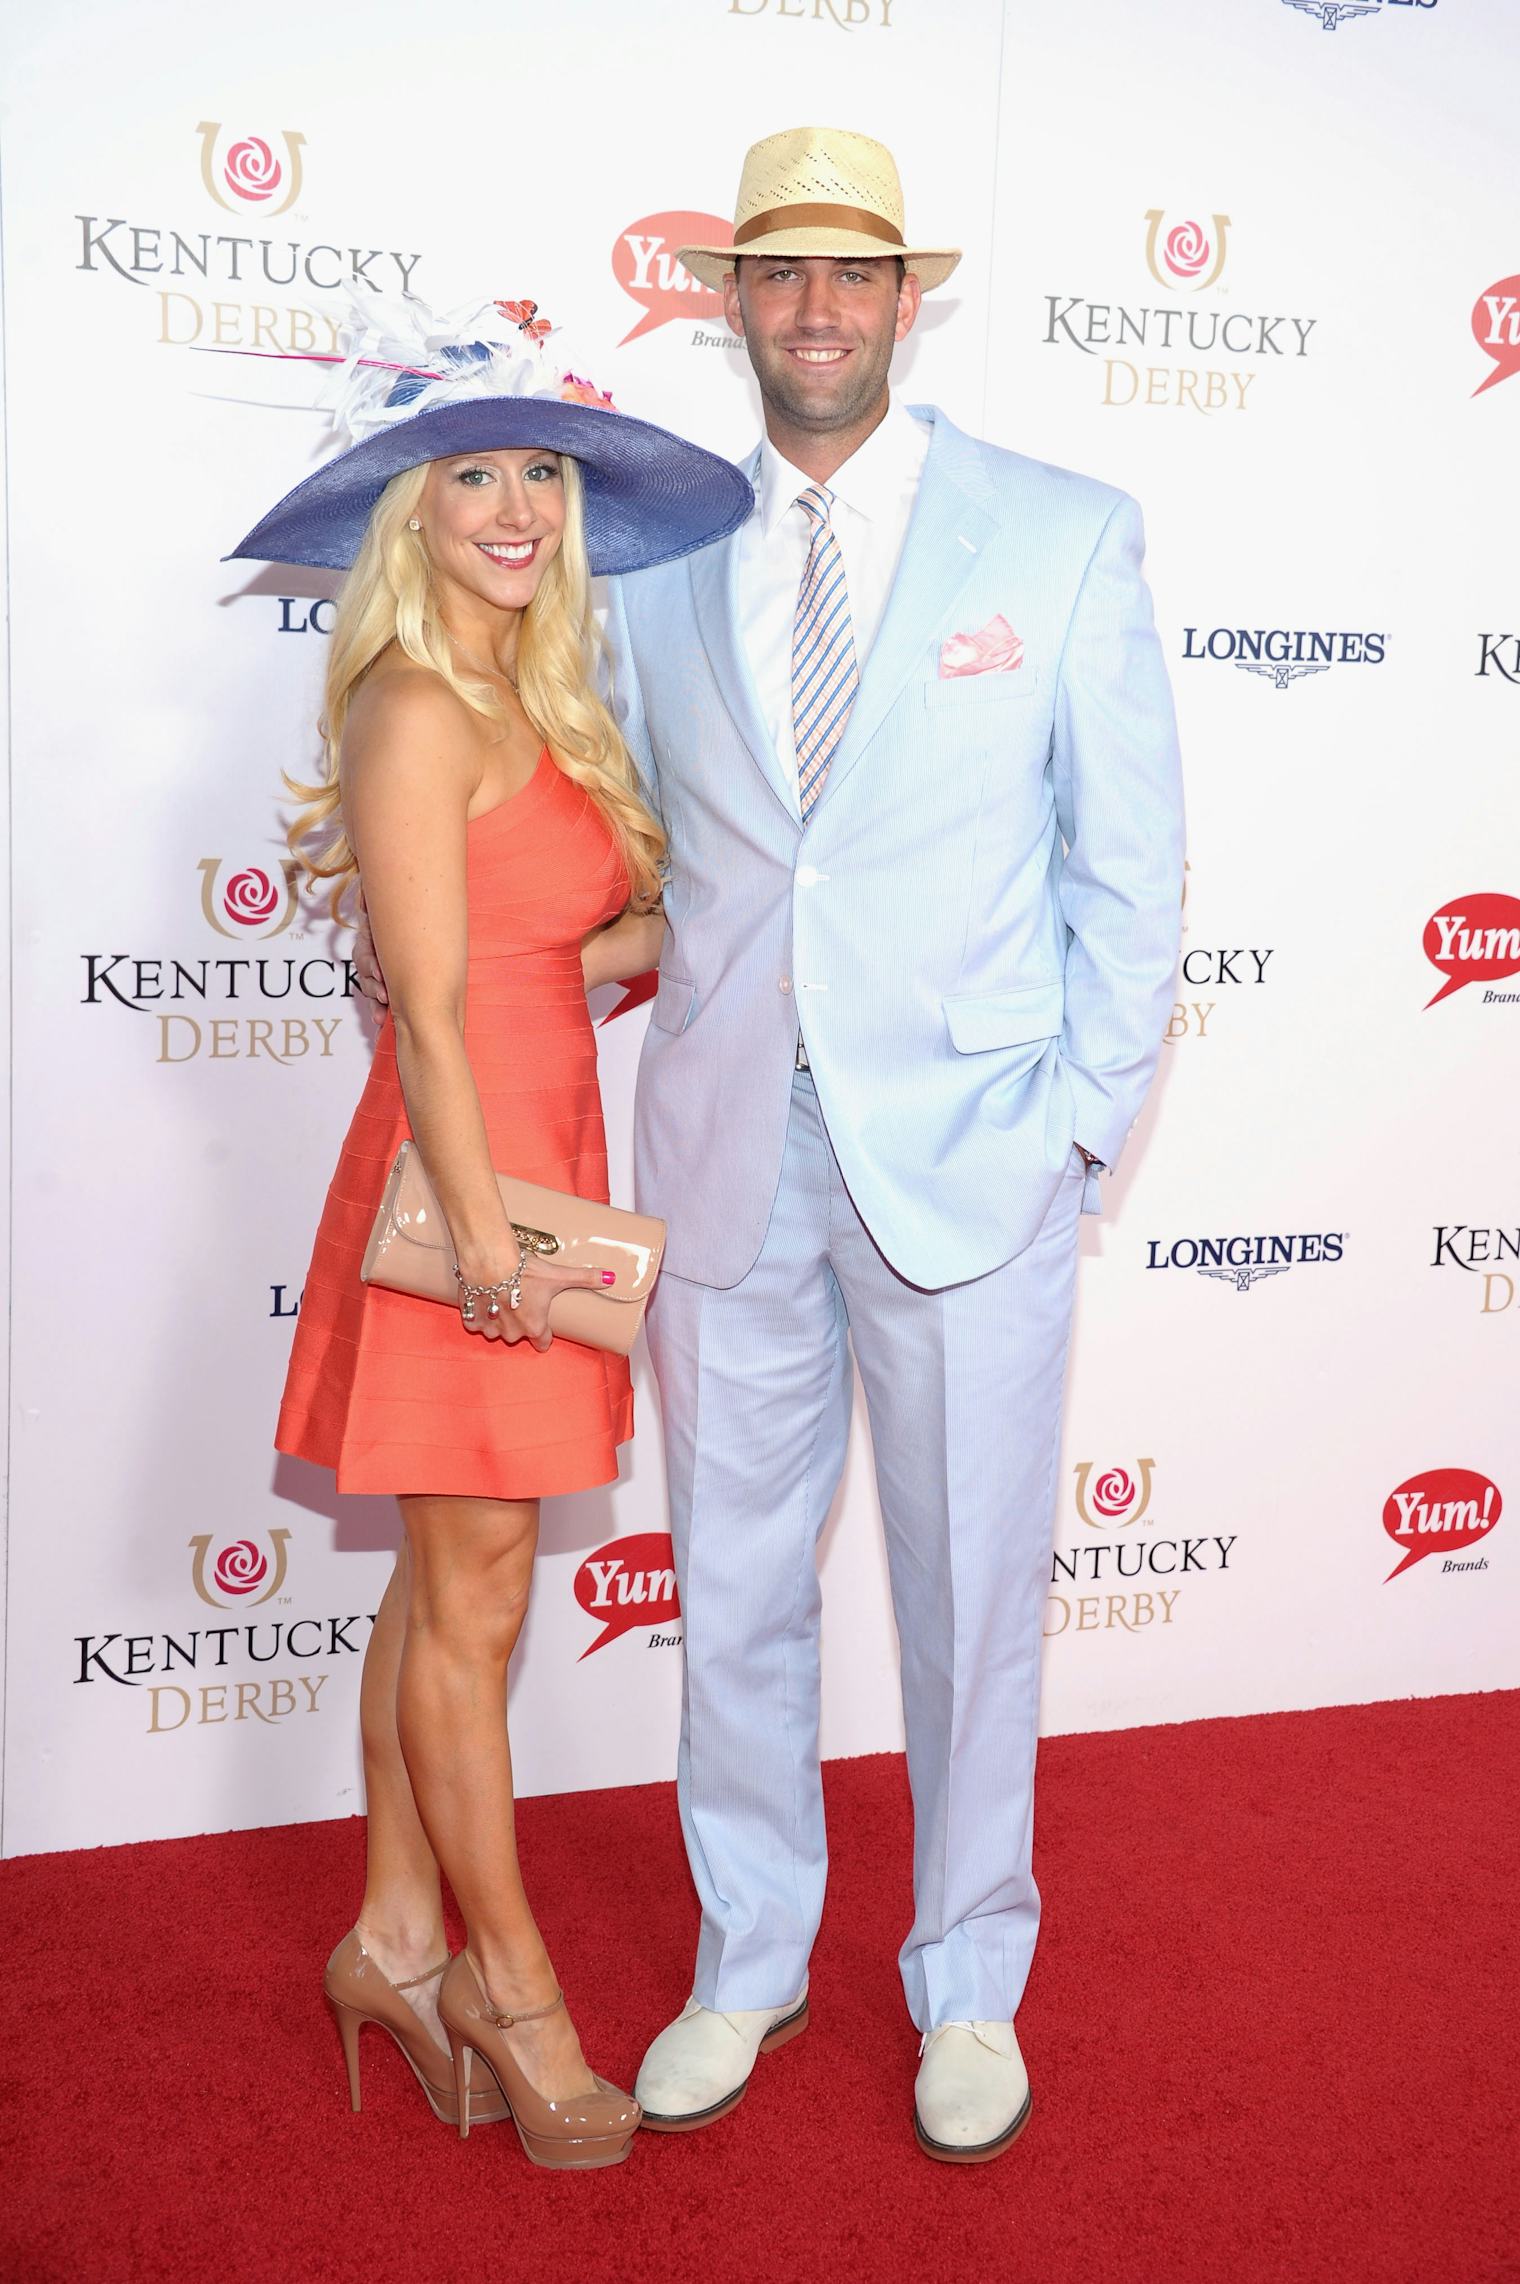 13 Kentucky Derby Couple Outfits That Will Melt Your Heart, Because